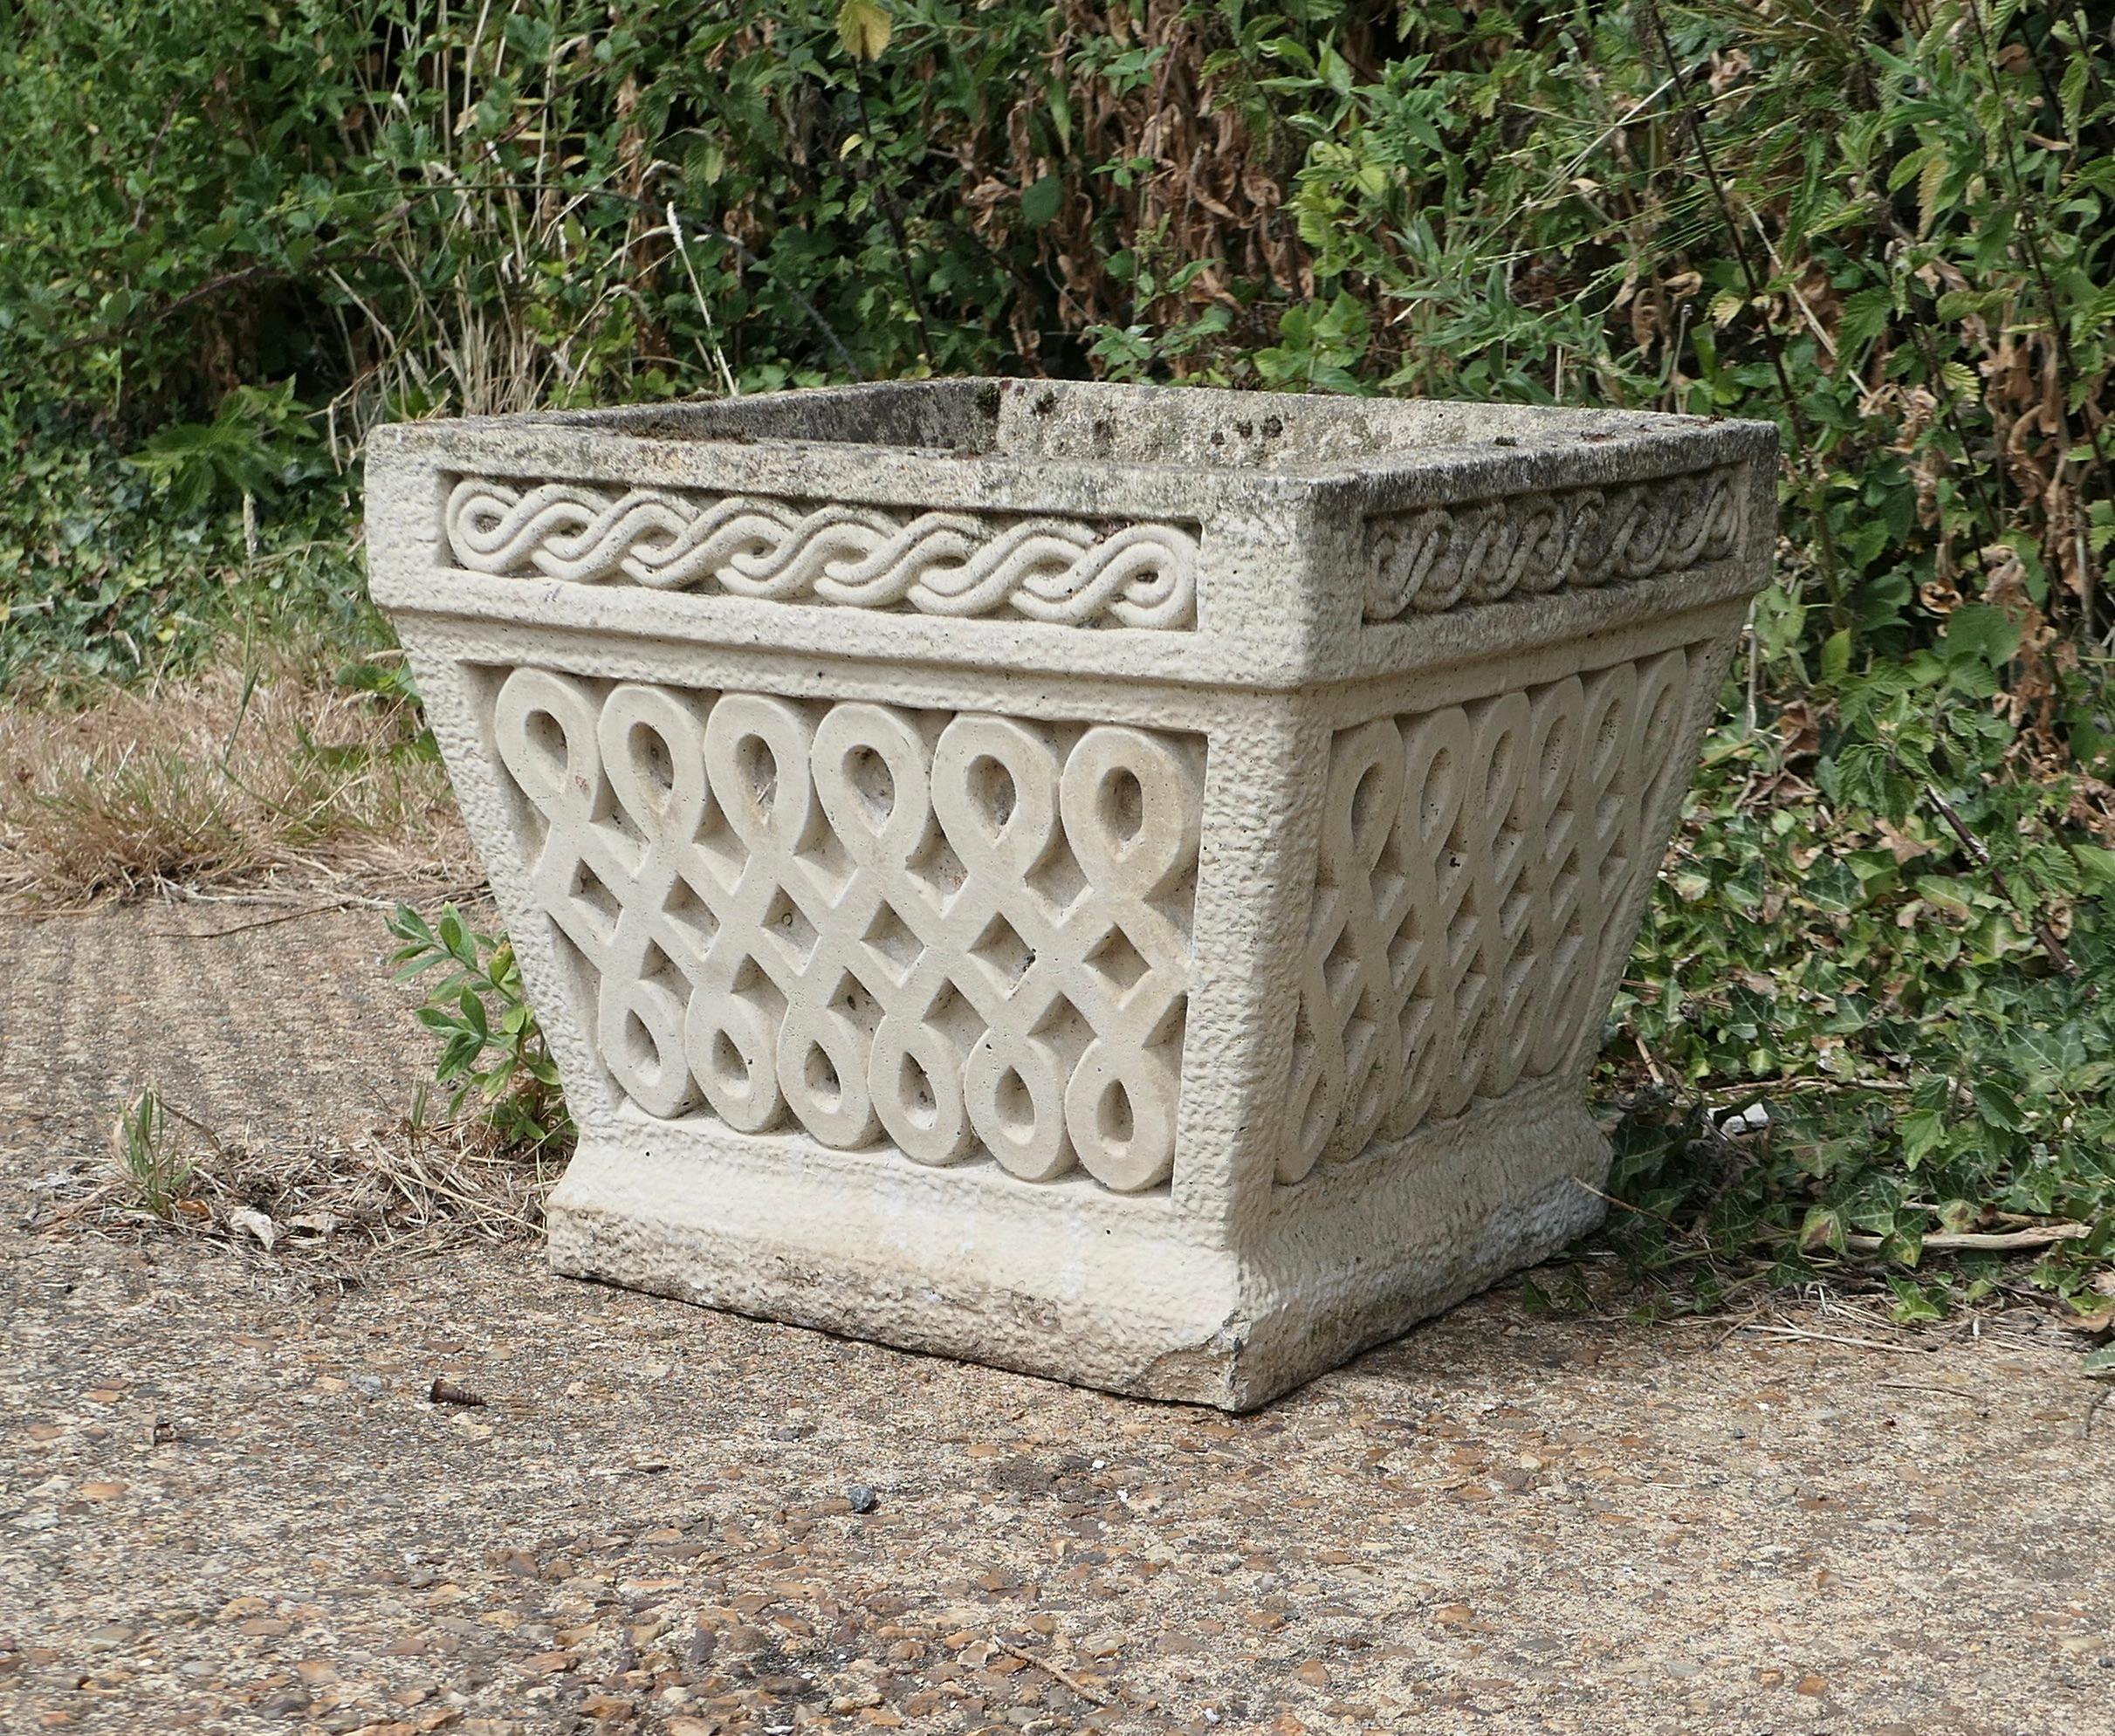 A Set of 6 Classical Basket Weave Garden Planters

An excellent set of 6 large square planters, this superb set came from an outdoor staircase where they were planted and displayed along one side
They are decorated in the Celtic style of the